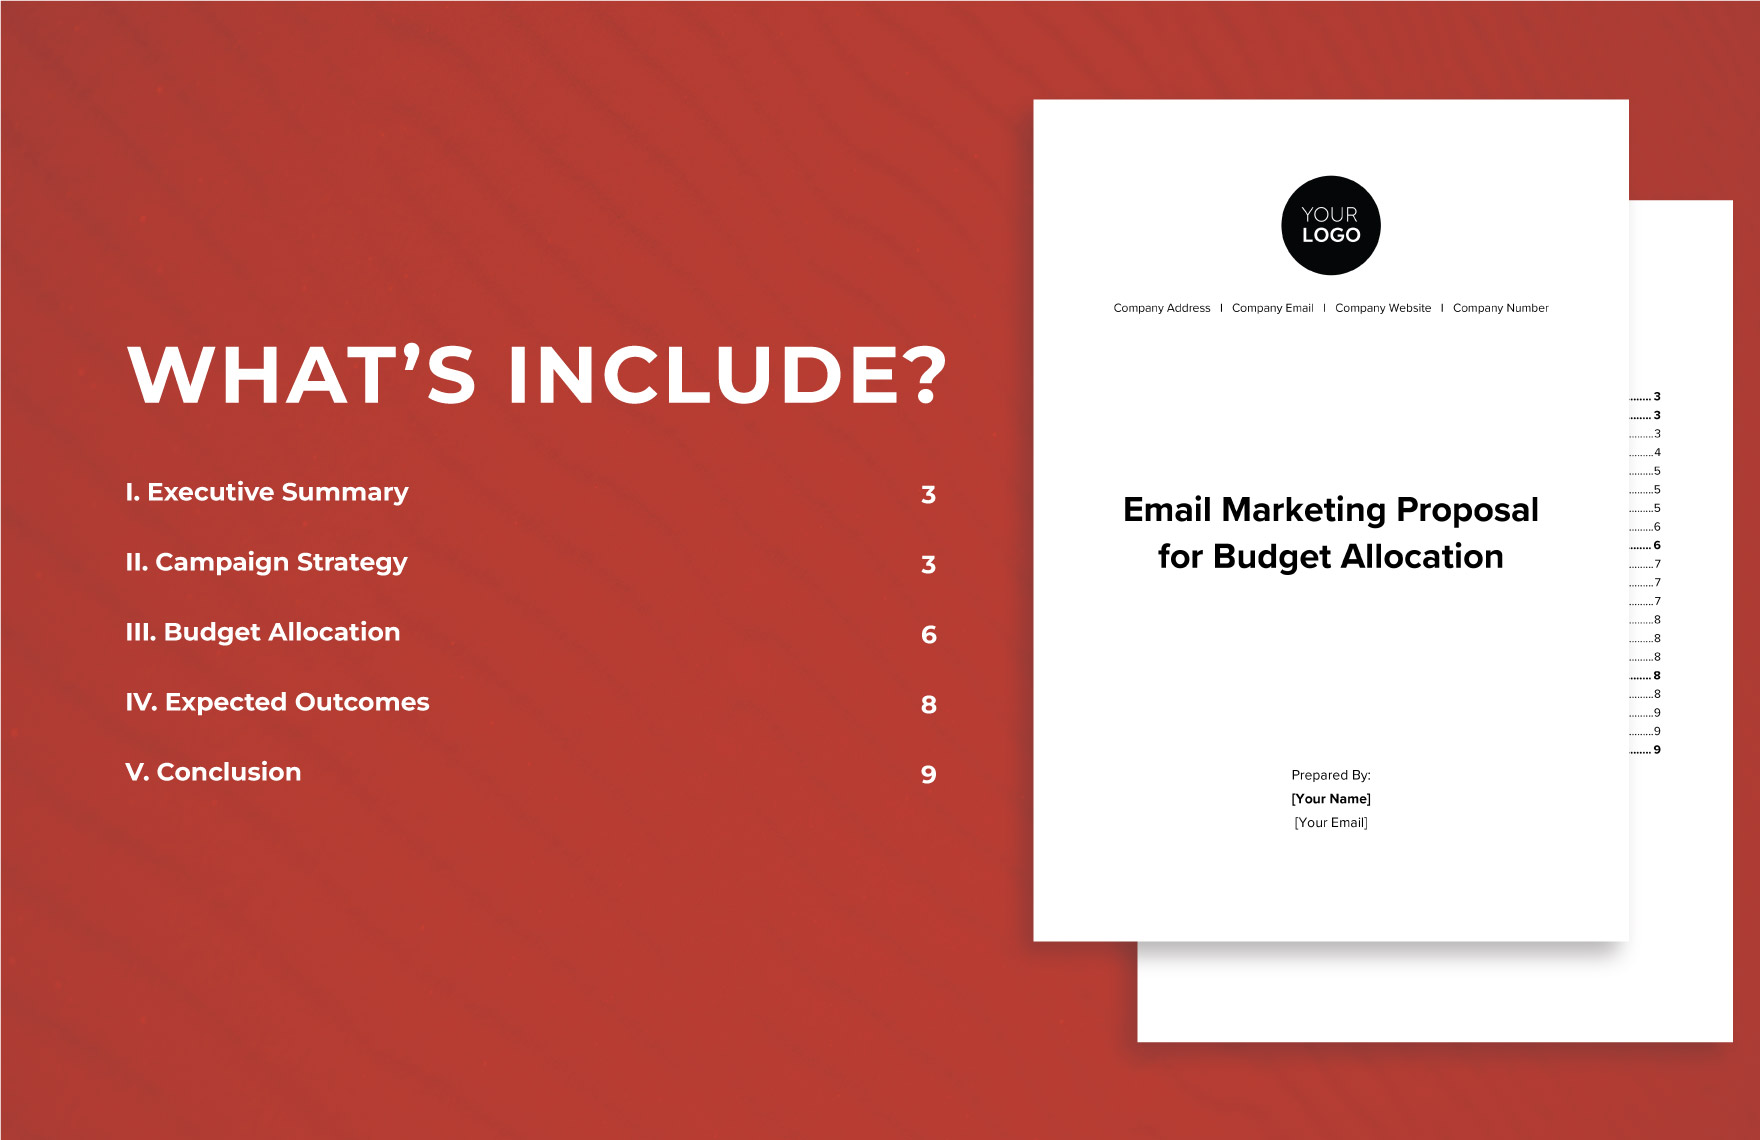 Email Marketing Proposal for Budget Allocation Template